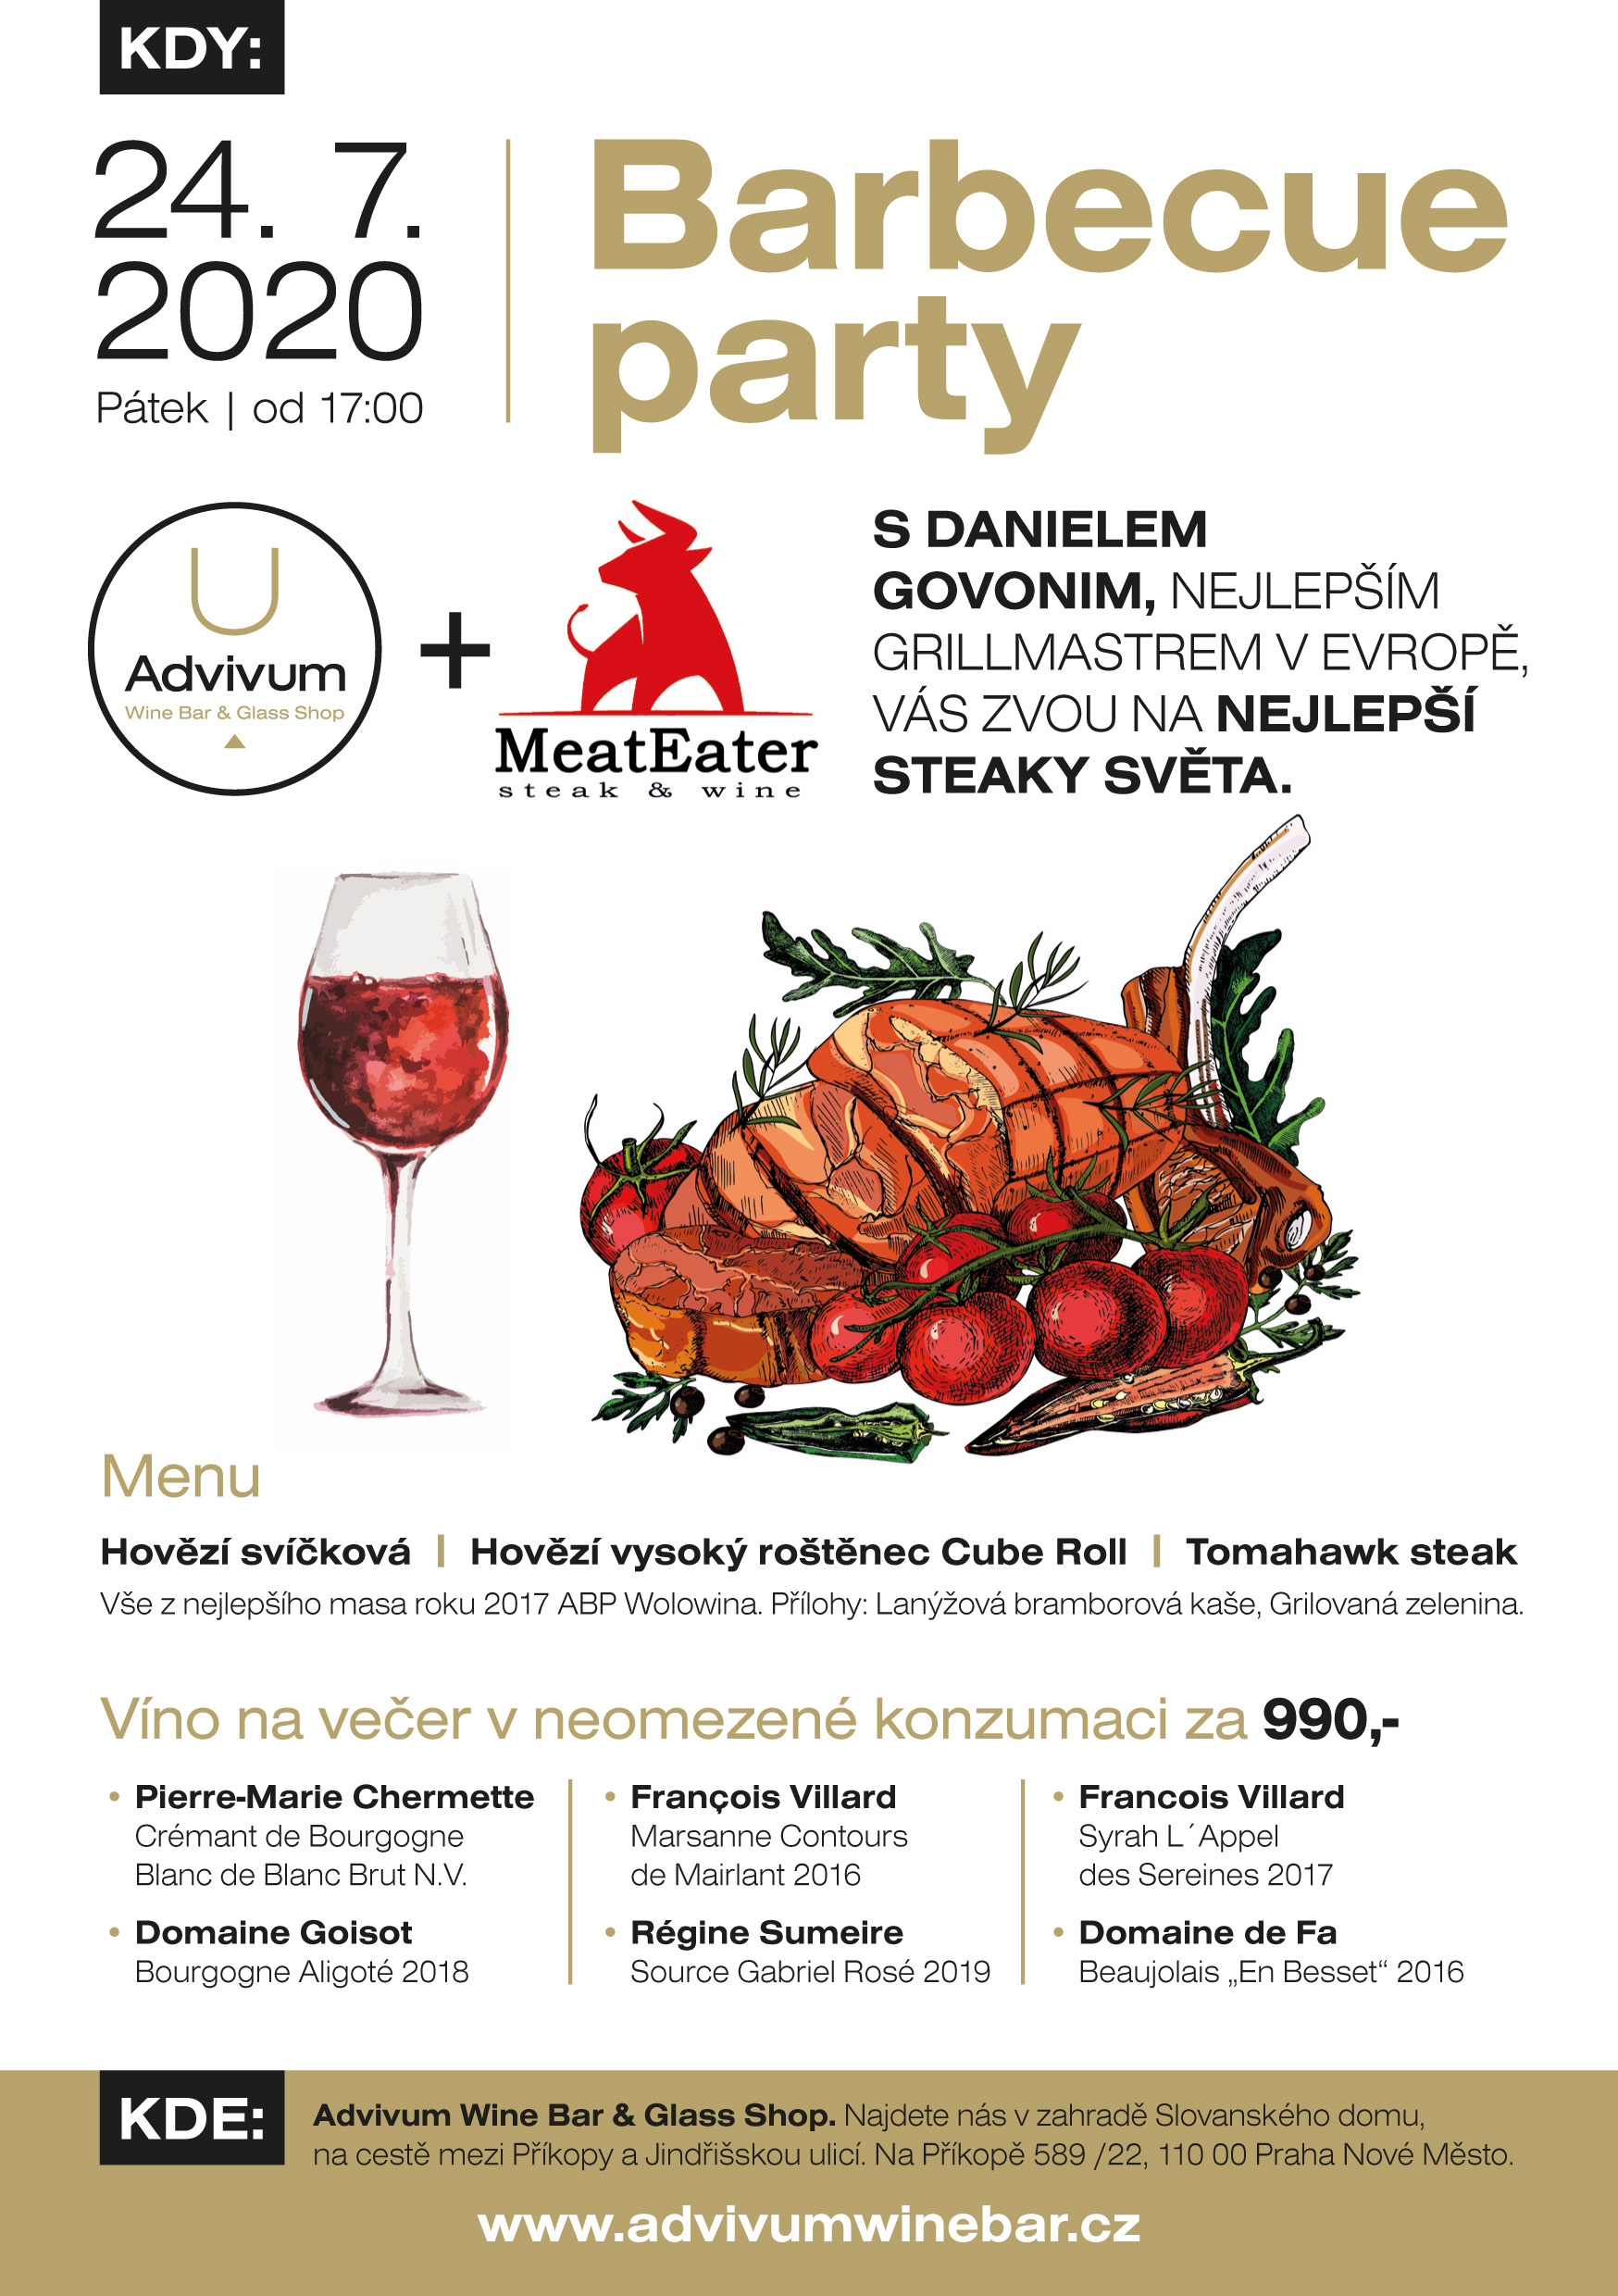 Advivum Wine Bar - Barbecue party MeatEater